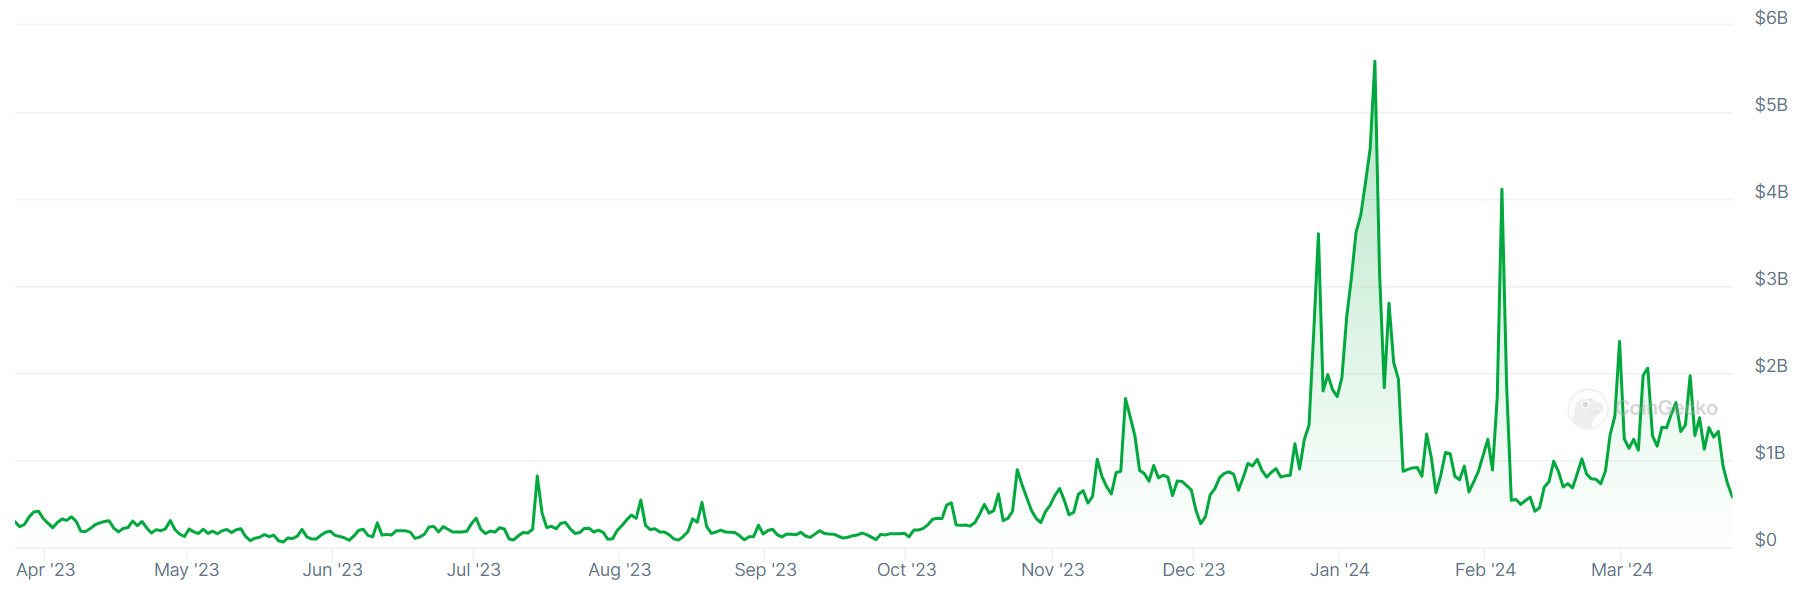 A graph showing trading volumes on the Bithumb crypto exchange over the past 12 months.